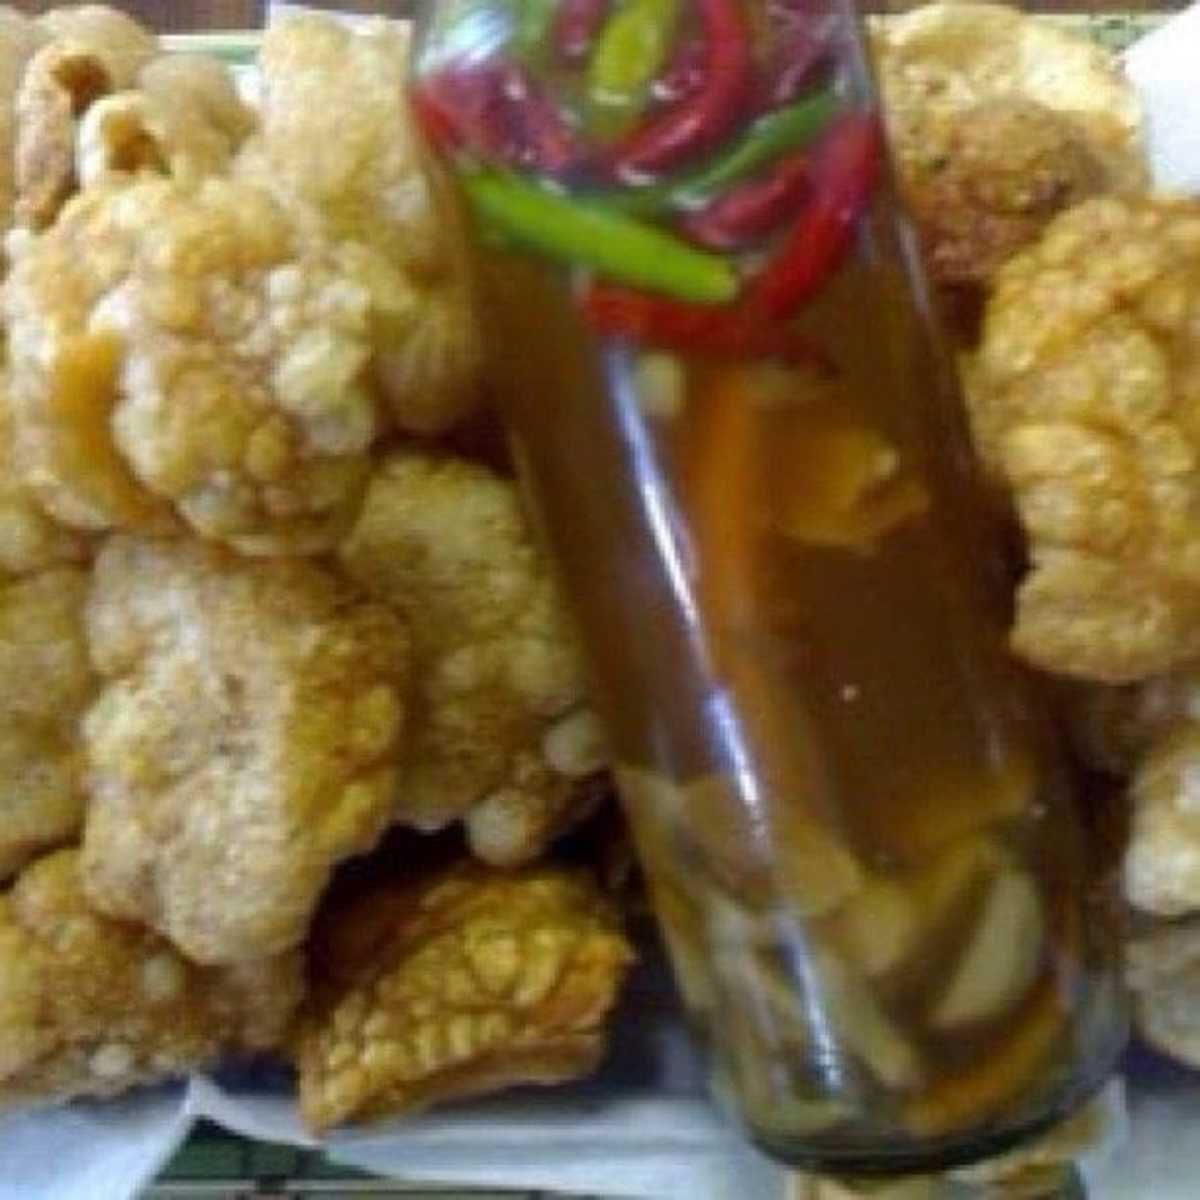 Chicharon with spiced-vinegar.